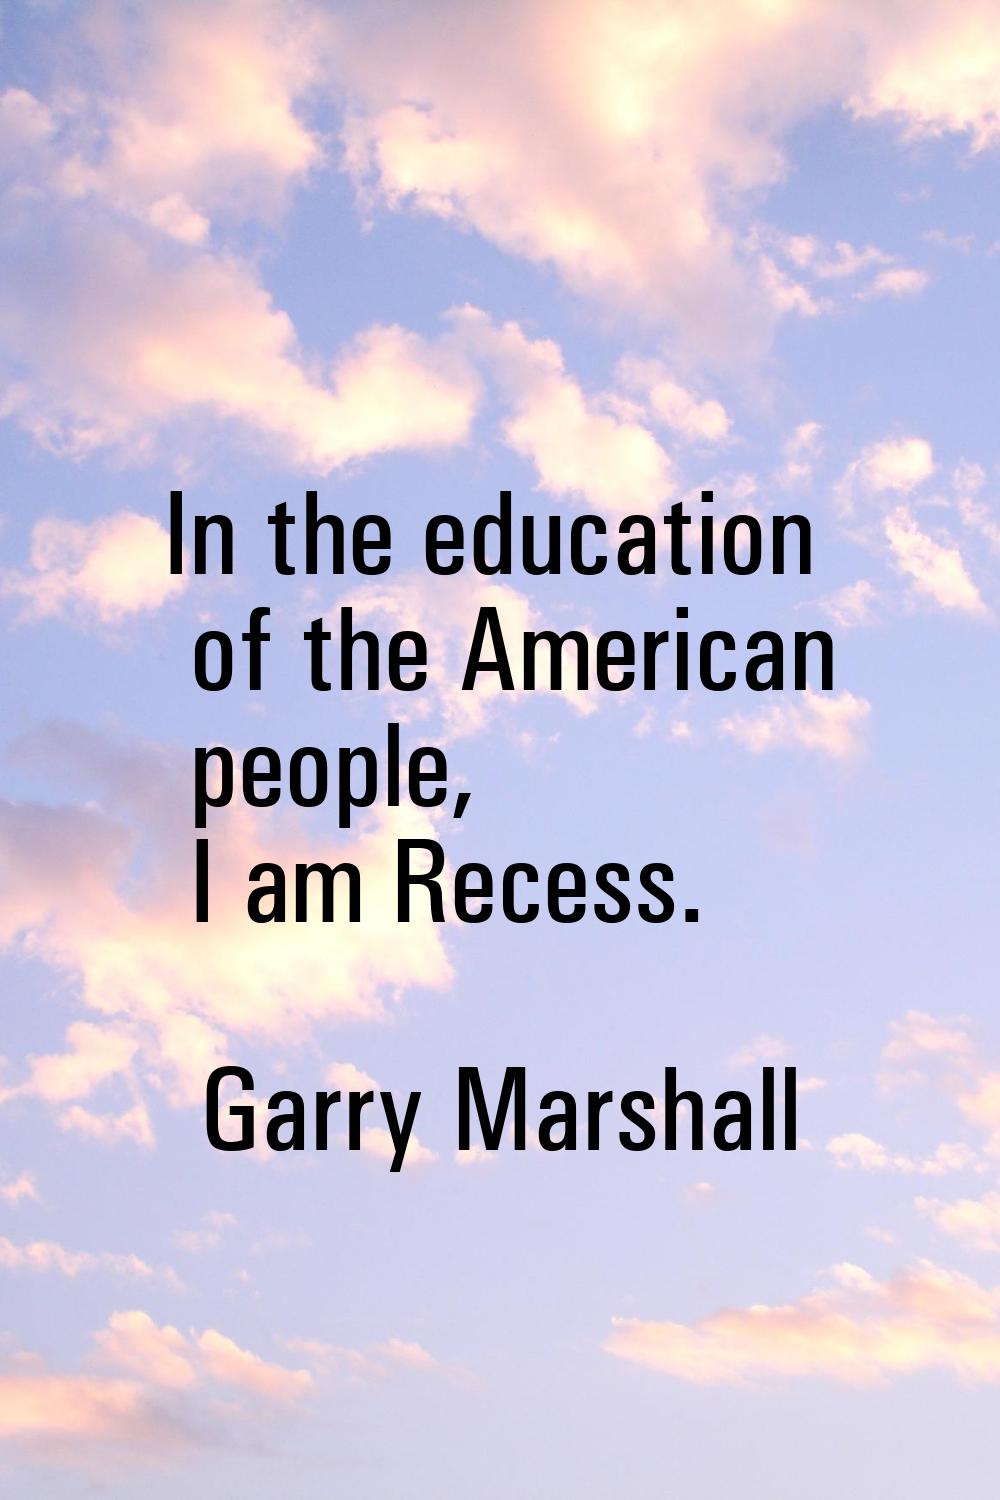 In the education of the American people, I am Recess.